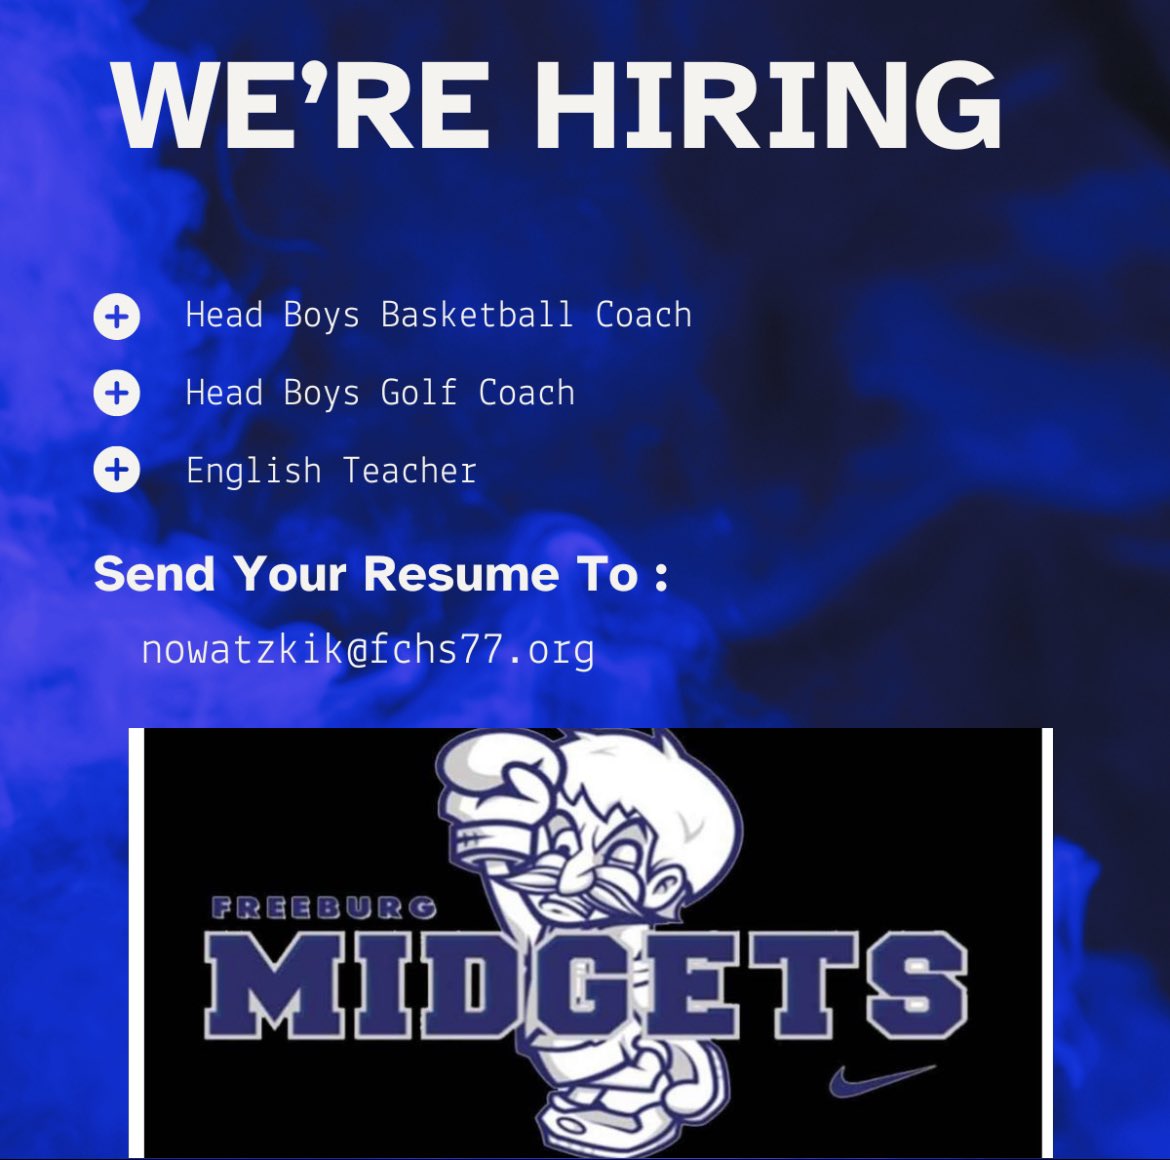 We are looking for a a couple coaches and a teacher! Come coach in a district that loves and supports athletics! Our basketball team has averaged 20 wins a year since 2018! If you are interested please let us know! @SoWestILHSSport @qcsports55 @GSV_STL @hshuddle618 @STLhssports